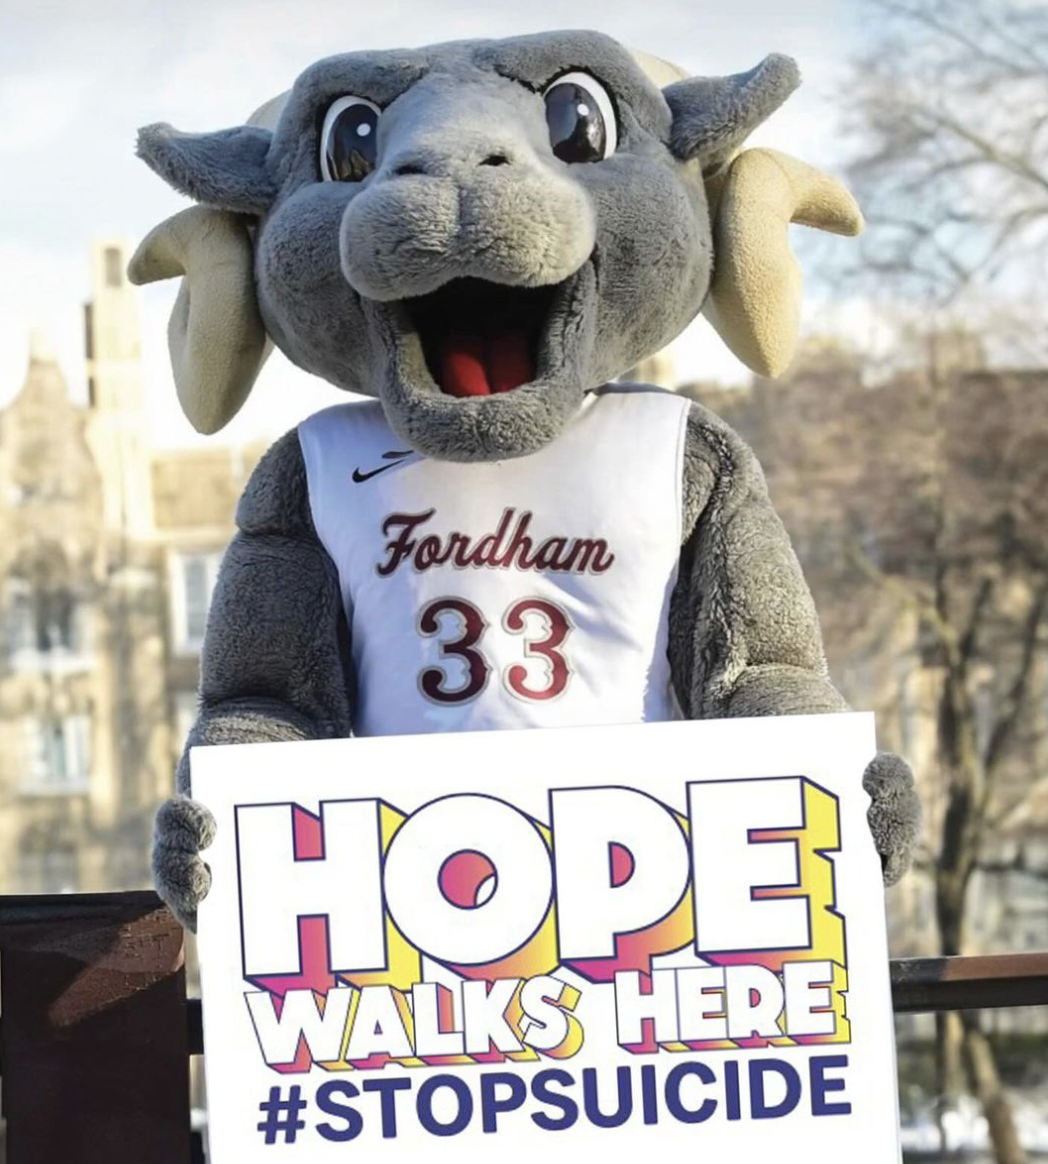 Fordham+clubs+and+fundraising+teams+prepare+for+the+AFSP+walk+by+raising+money+for+the+cause.+%28Courtesy+of+Instagram%29